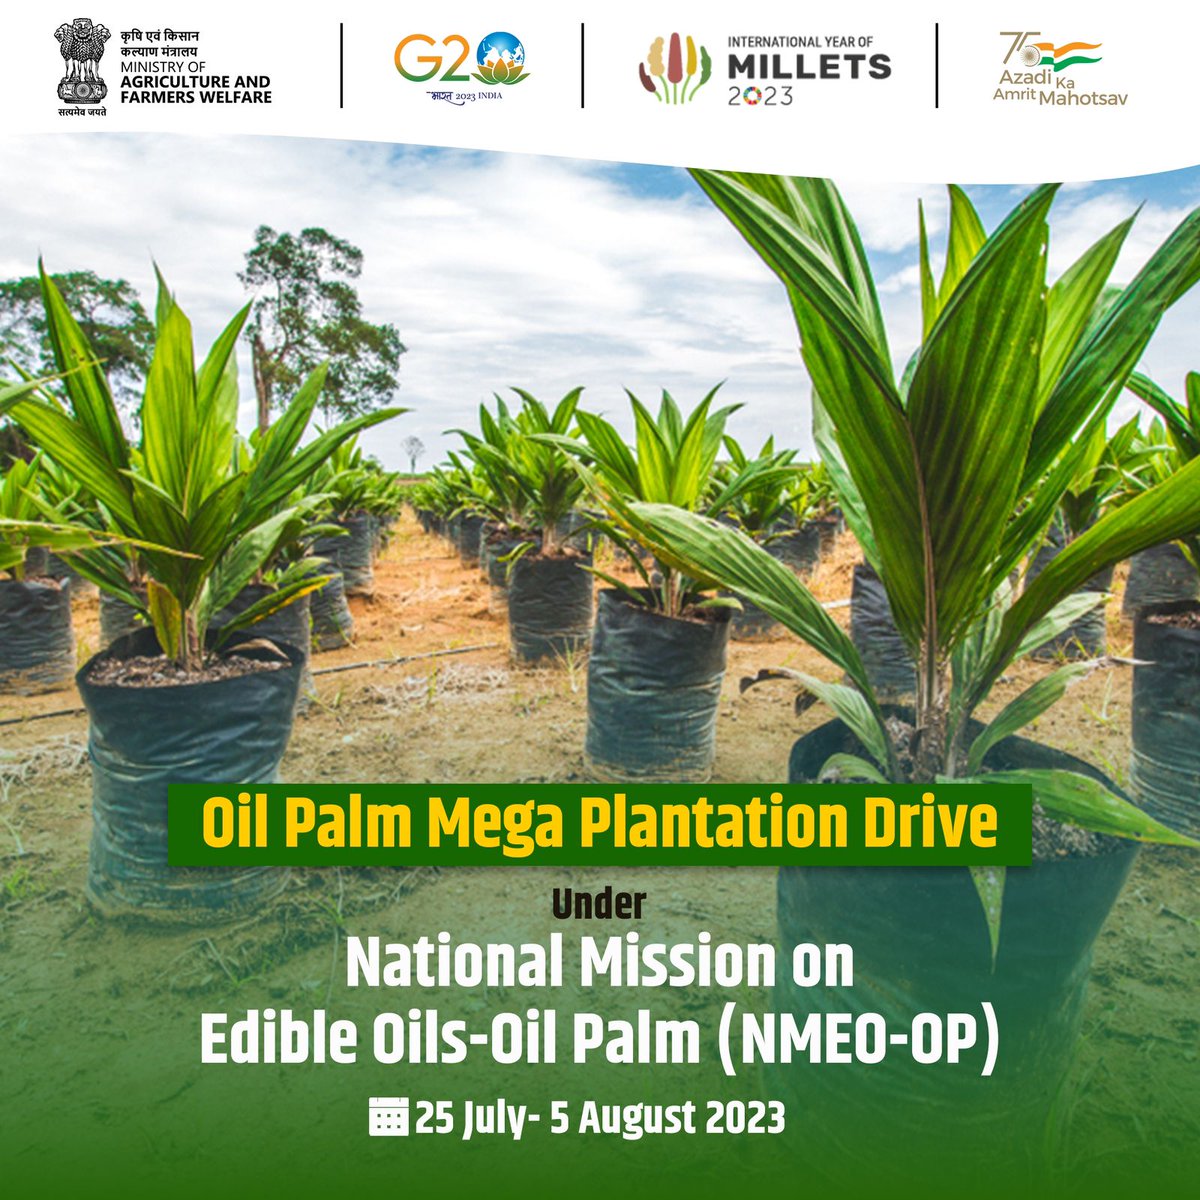 State government & Private parties will be participating in the 12-day Pan-India drive to promote the edible oil and make India self-reliant or #Aatmanirbhar. 

#Oilpalm #sustainableoilproduction #NMEOOP #AatmanirbharBharat